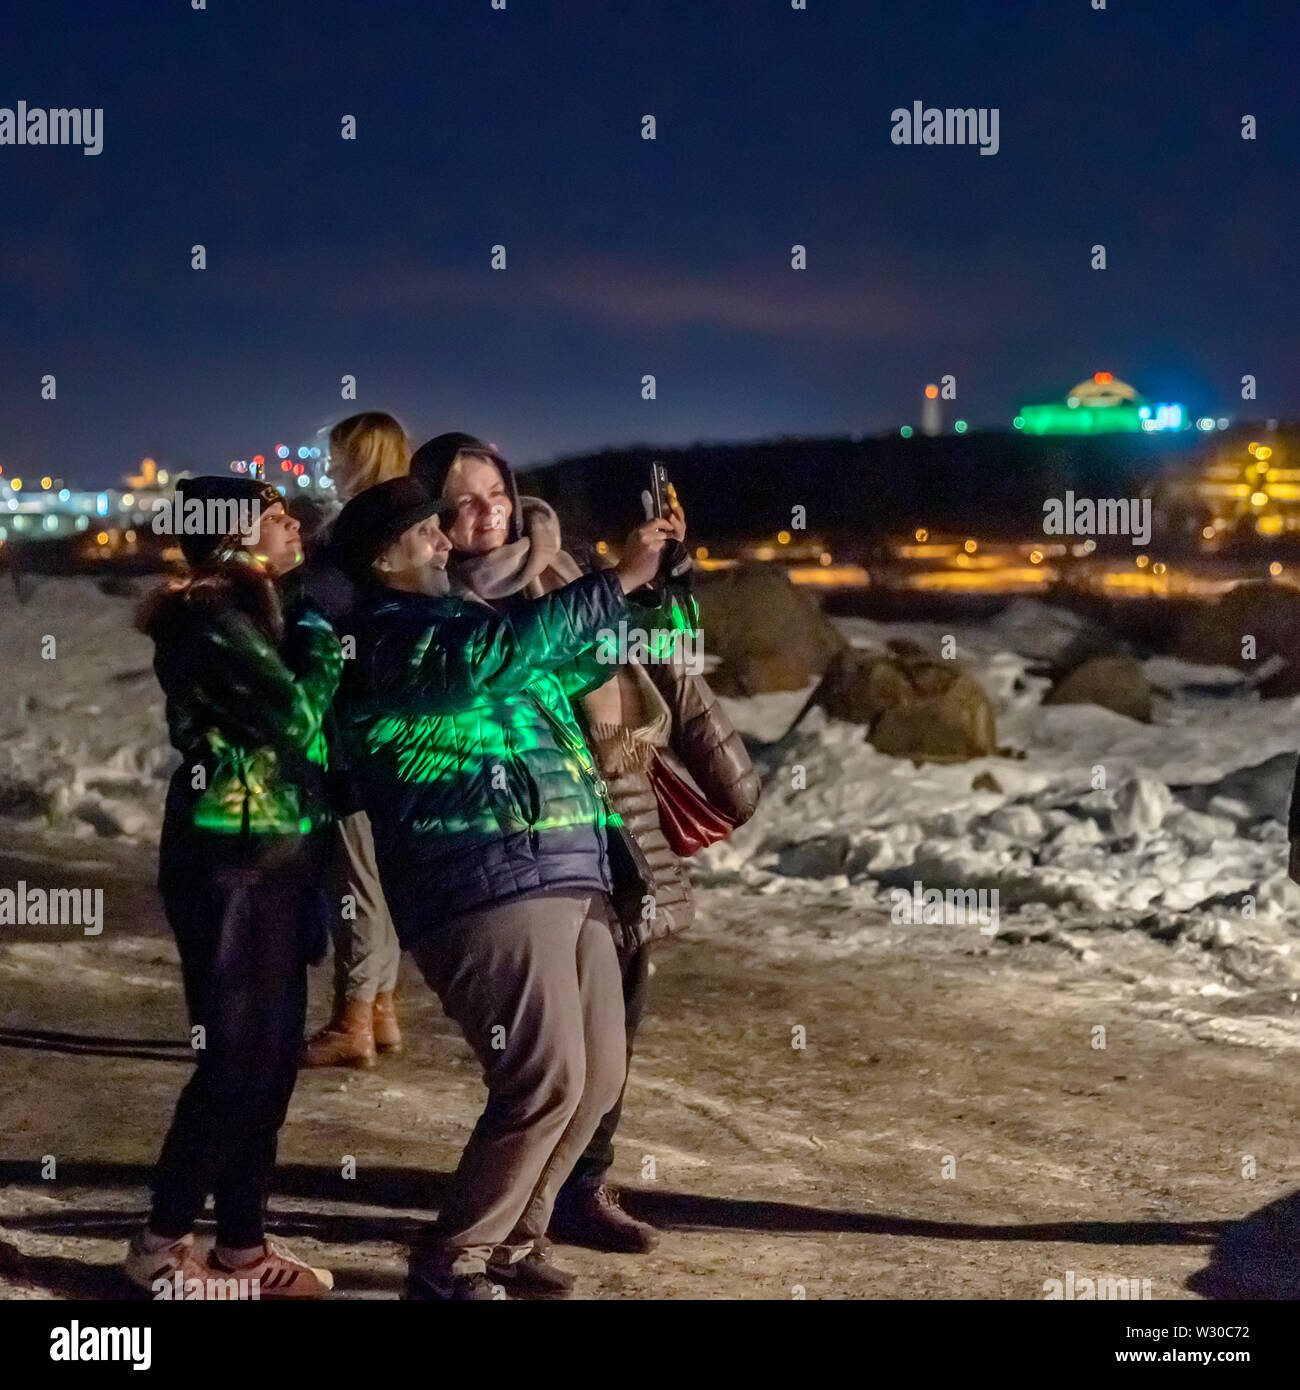 People taking pictures during the Winter lights Festival, Reykjavik, Iceland Stock Photo